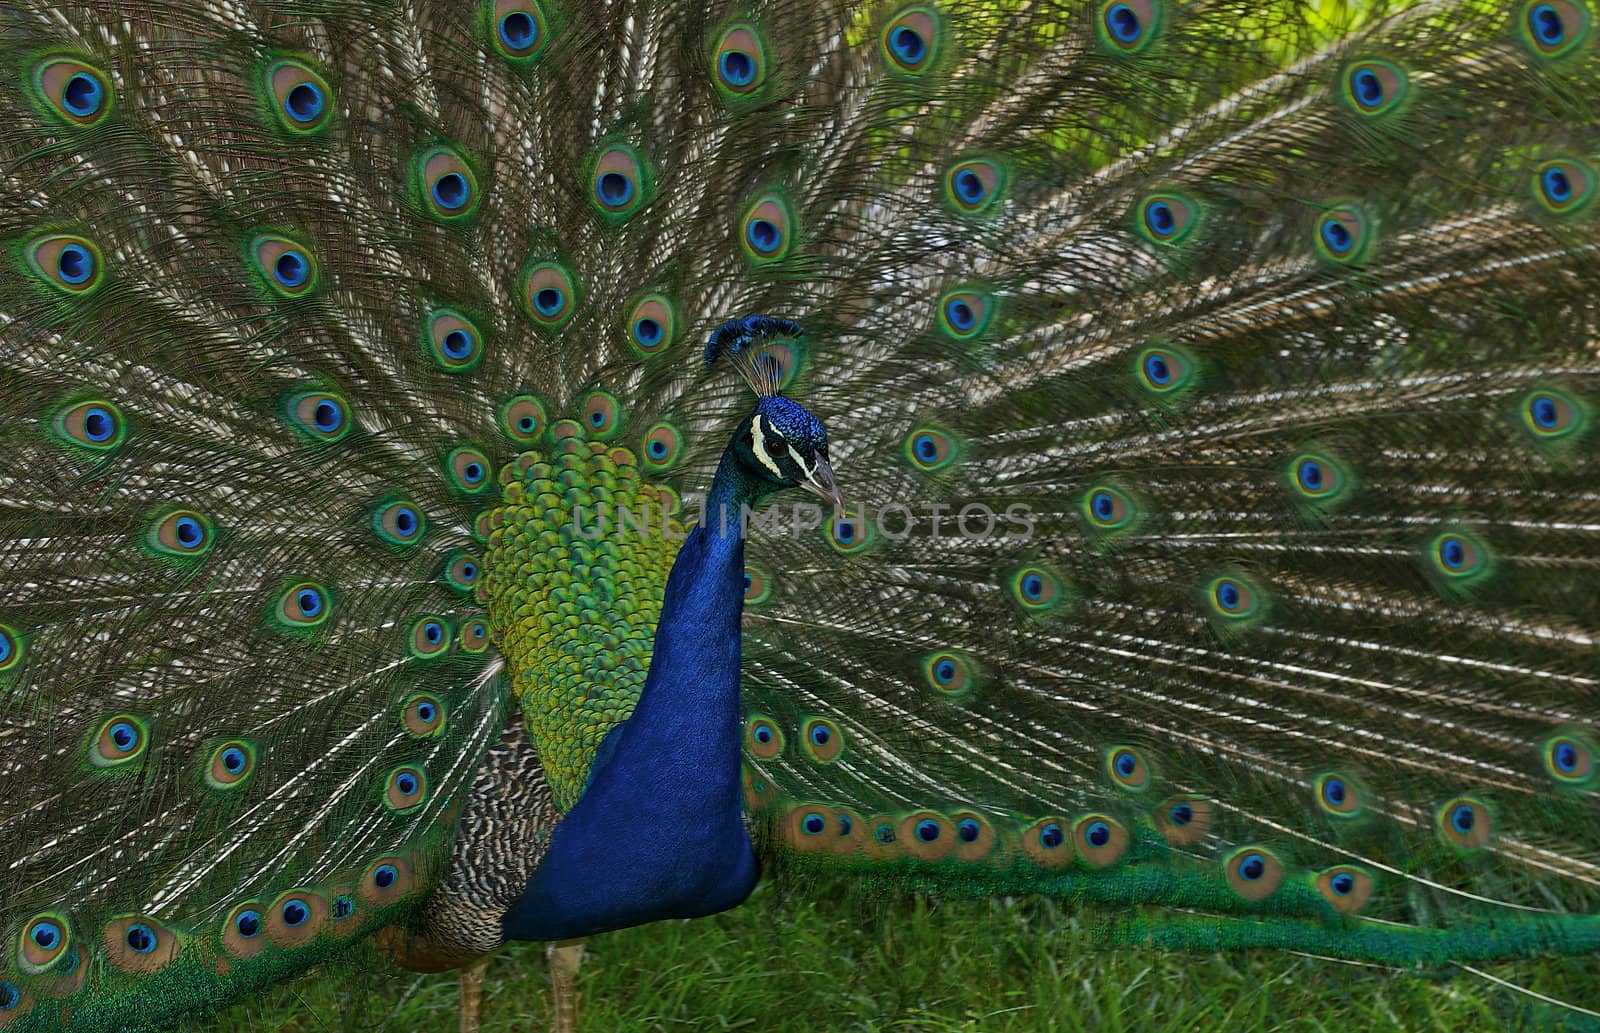 Colorful male peacock with tail feathers spread out covering the background.